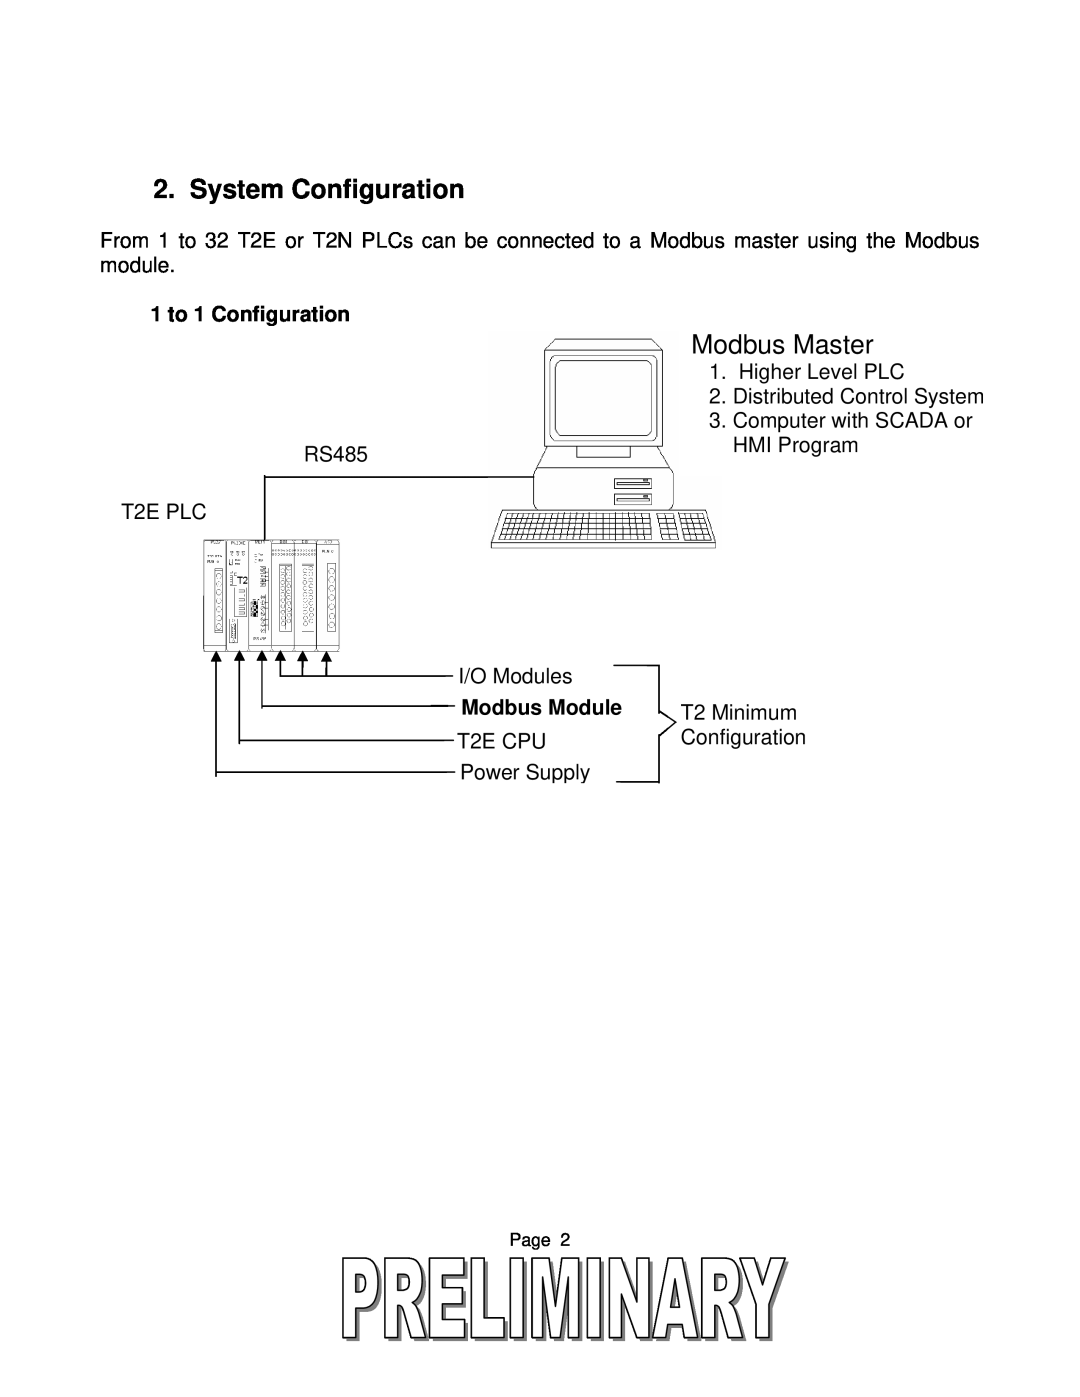 Toshiba T2 Series user manual System Configuration, Modbus Master, 1 to 1 Configuration, Modbus Module 